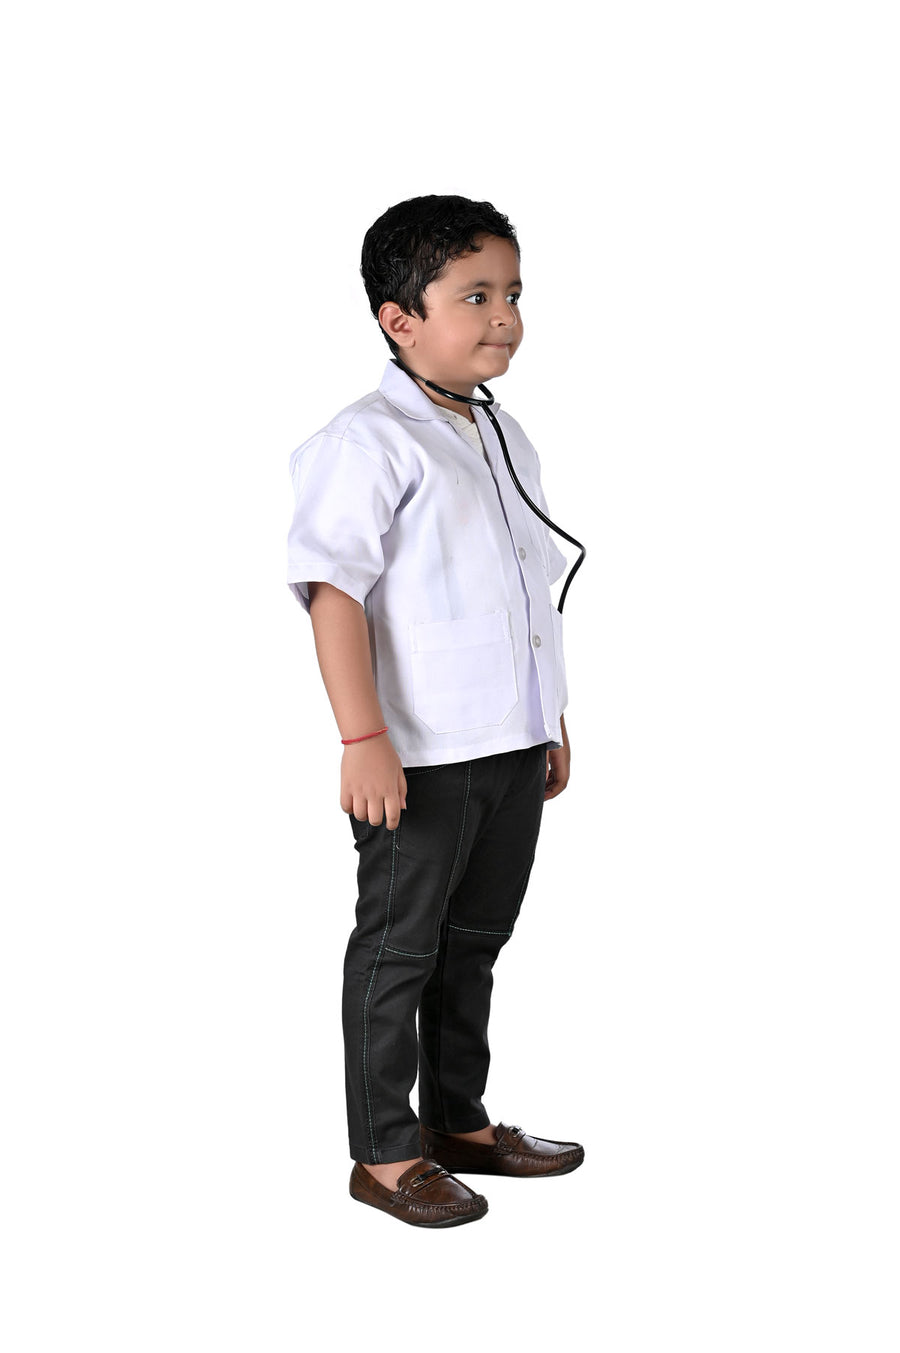 Doctor Physician Professional with Stethoscope Fancy Dress Costume for Kids